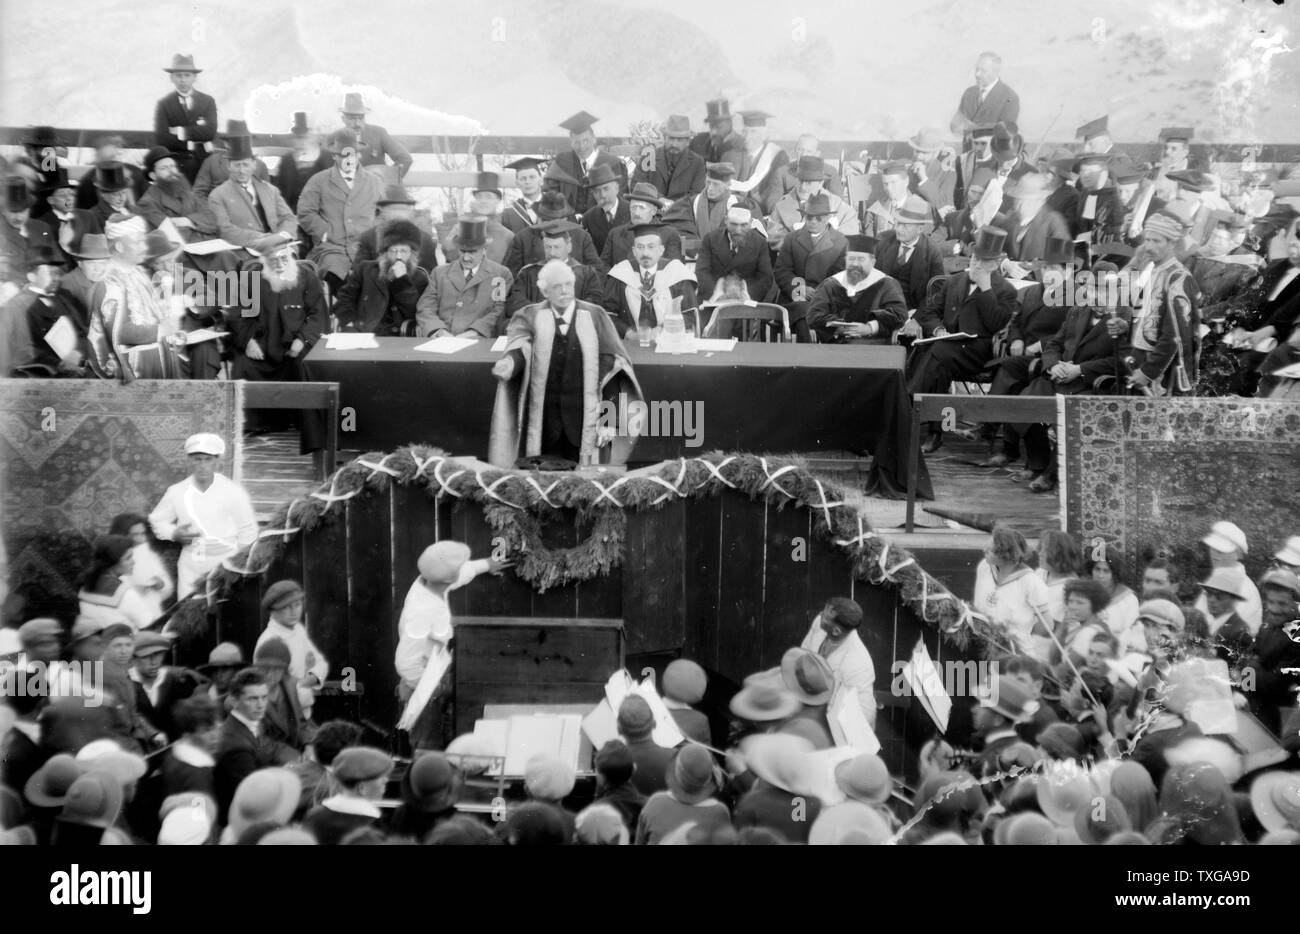 Lord Balfour declaring the Hebrew University, Jerusalem, Palestine - 1925.   Lord Balfour was a British Conservative politician and statesman. Stock Photo